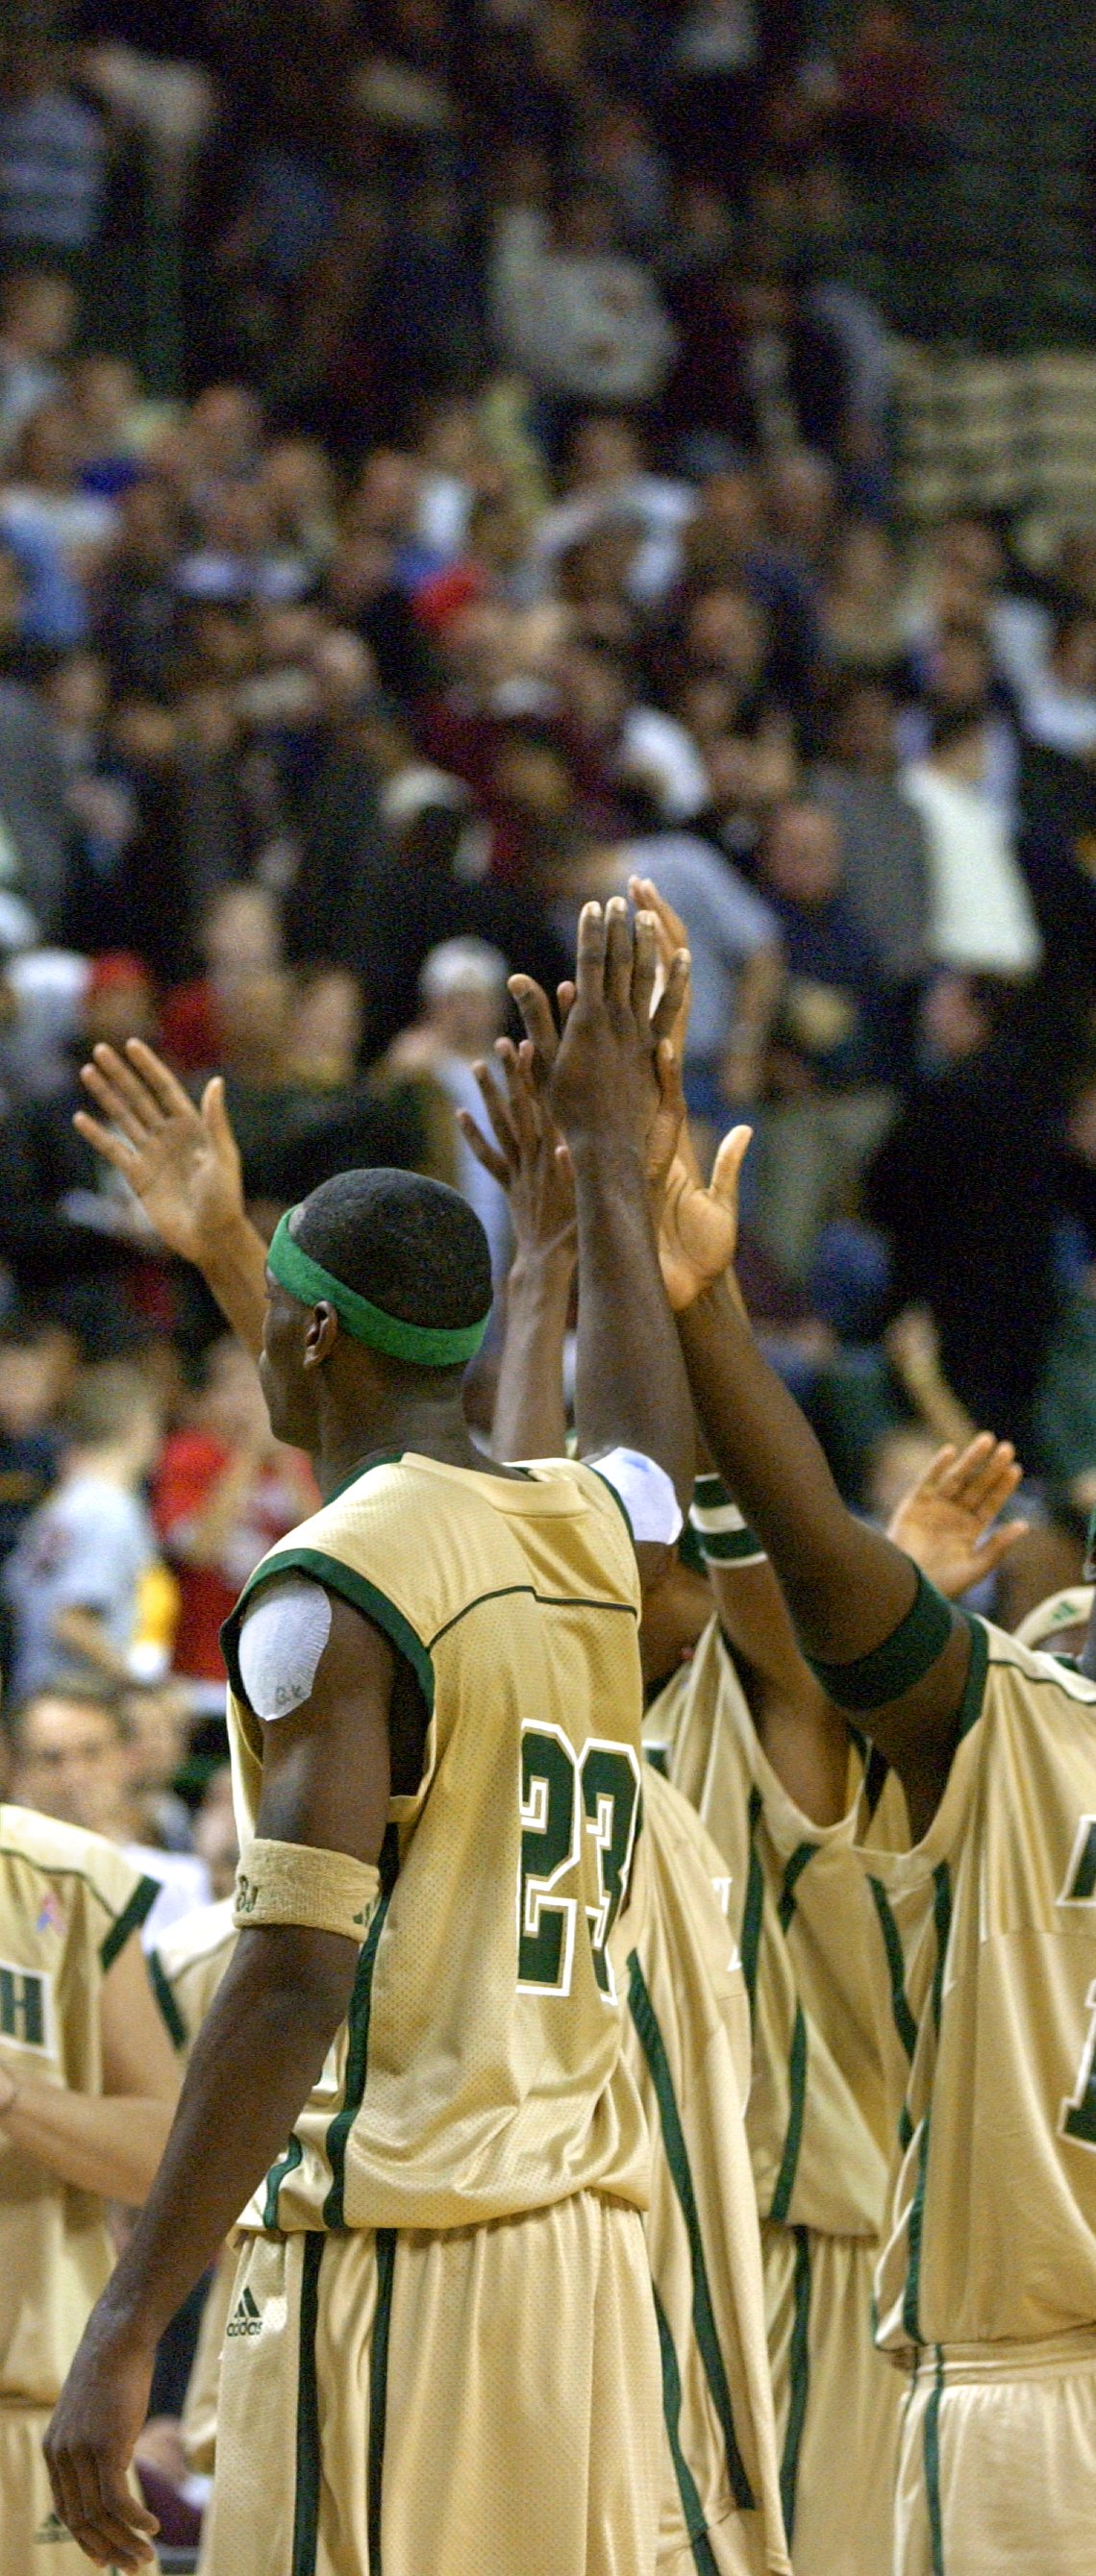 With just second left in the game and SVSM leading the game by 20, LeBron James receives a standing ovation from the crowd as he high-fives his teammates Thursday, December 12, 2002 at the Cleveland State Convocation Center in Cleveland. SVSM beat #1-ranked Oak Hill 65-45.  (Joshua Gunter/ The Plain Dealer) 